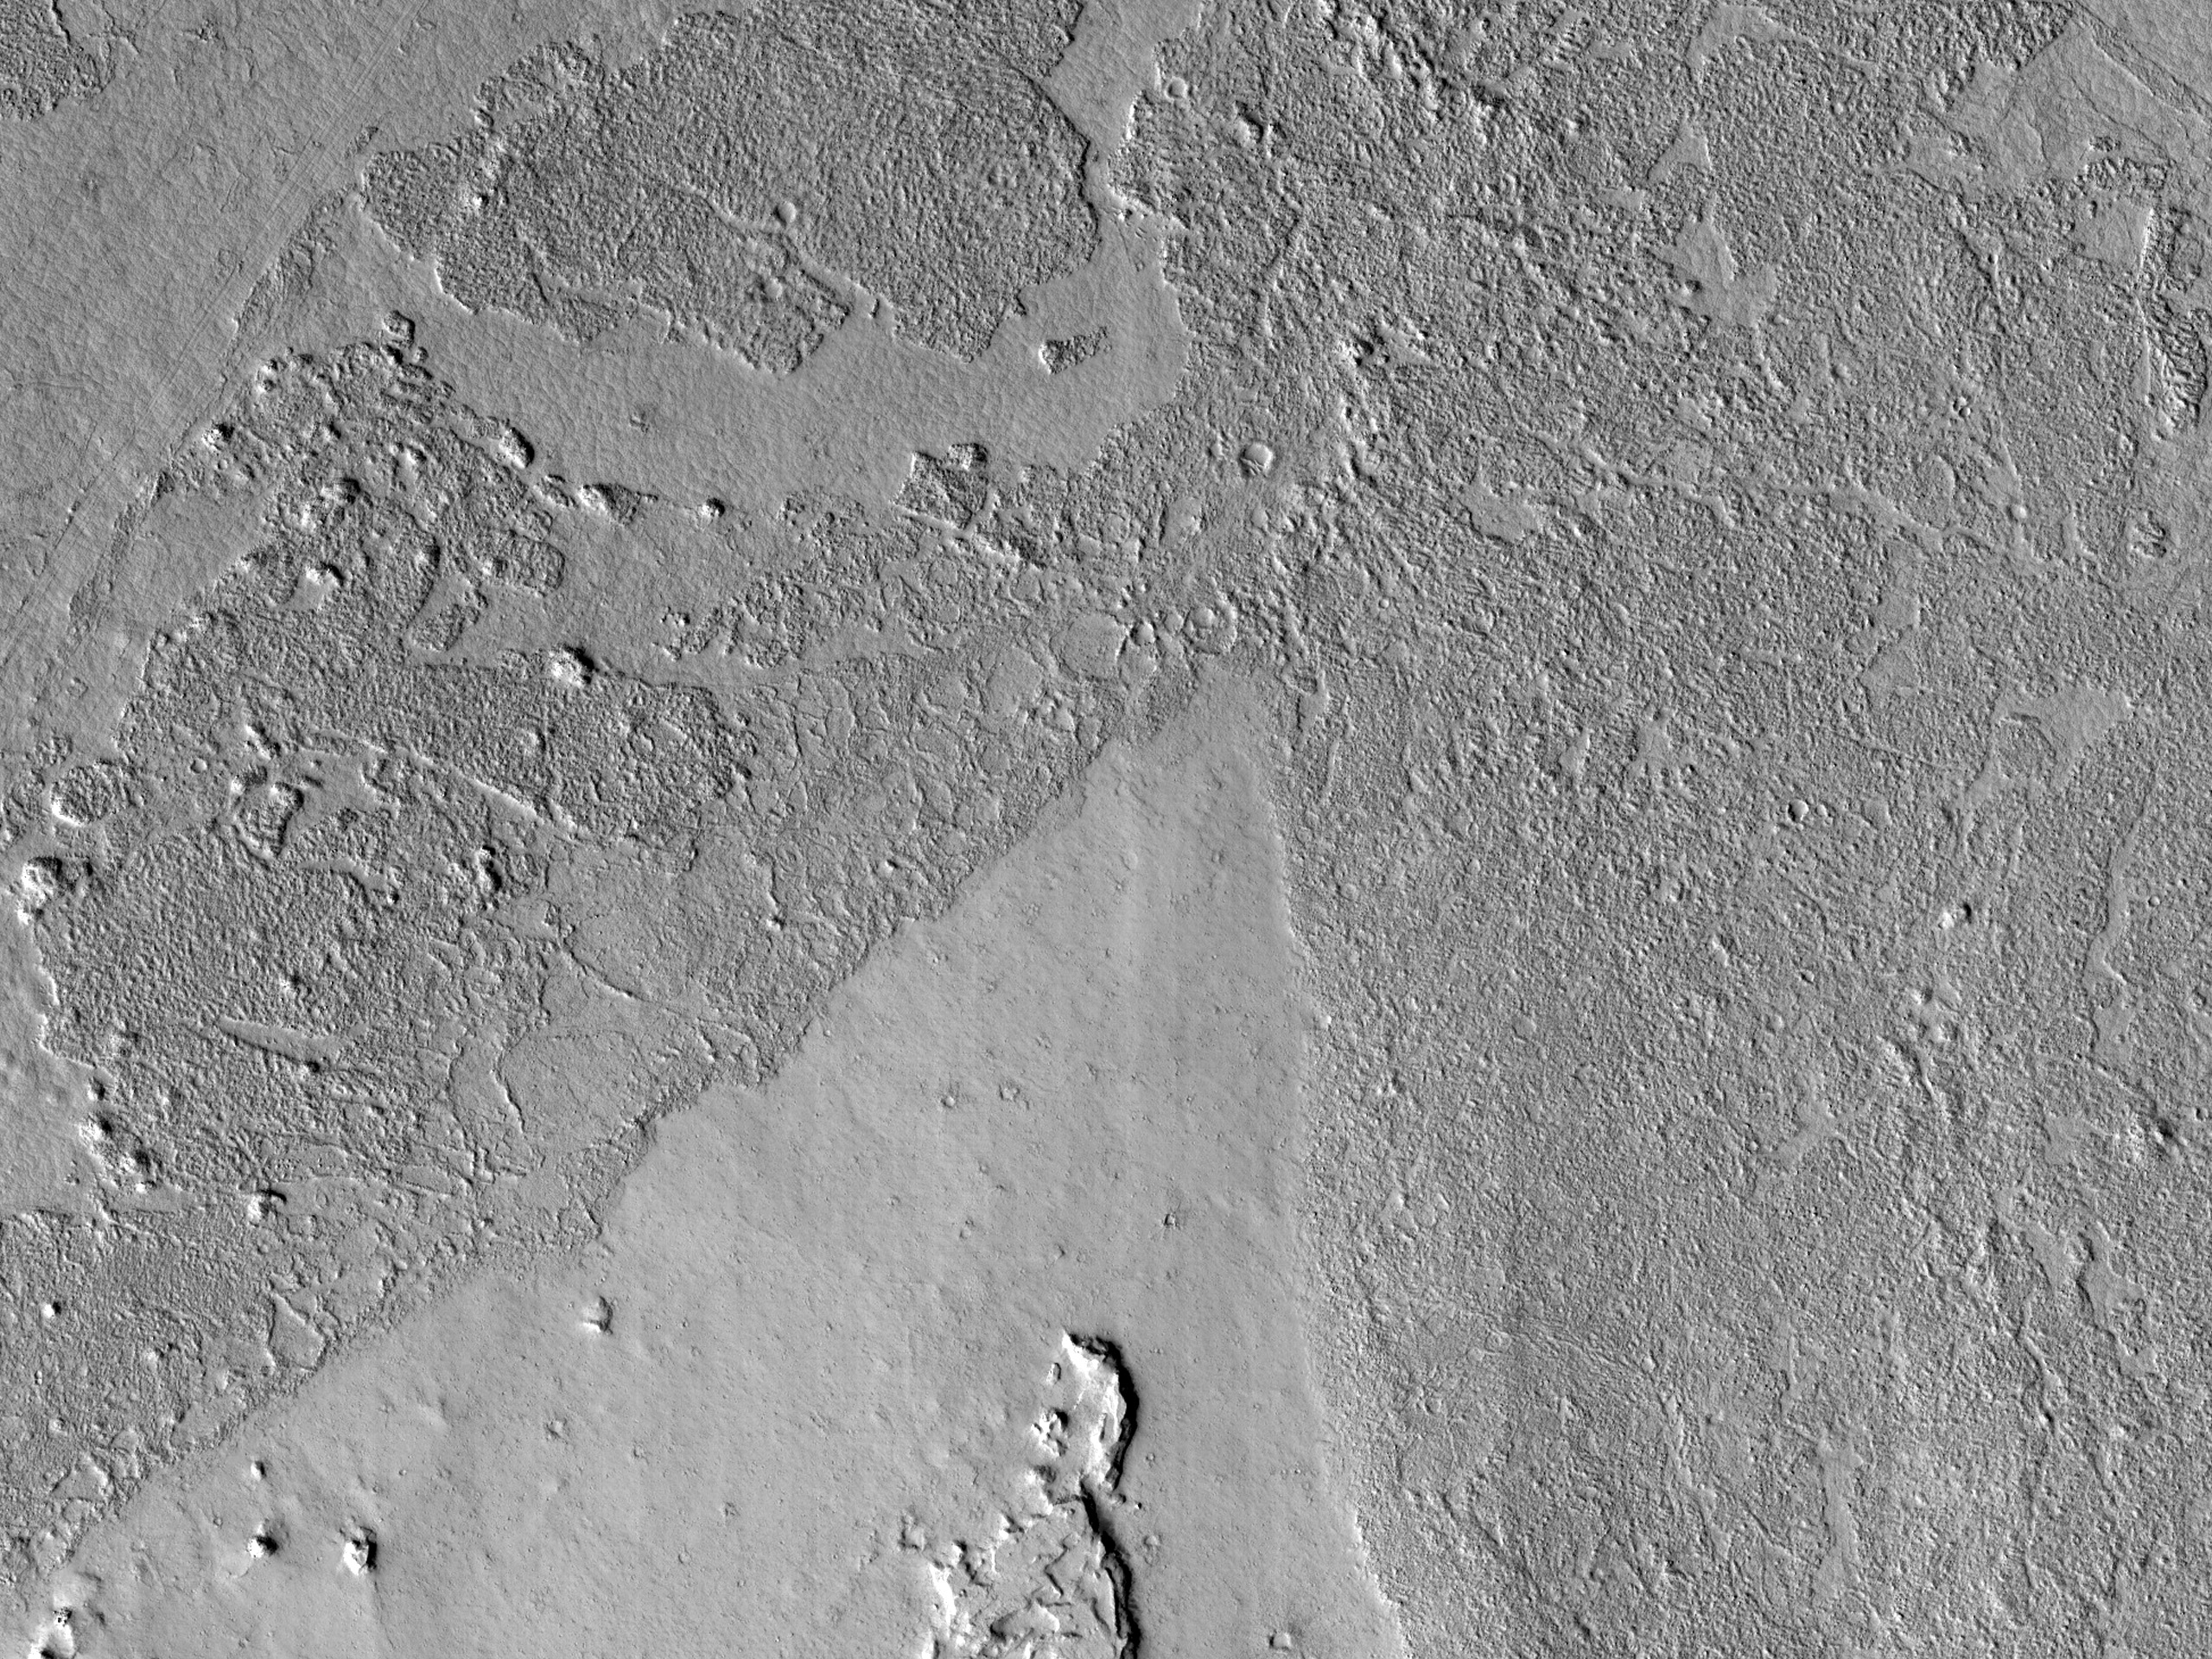 A Streamlined Feature in Marte Vallis